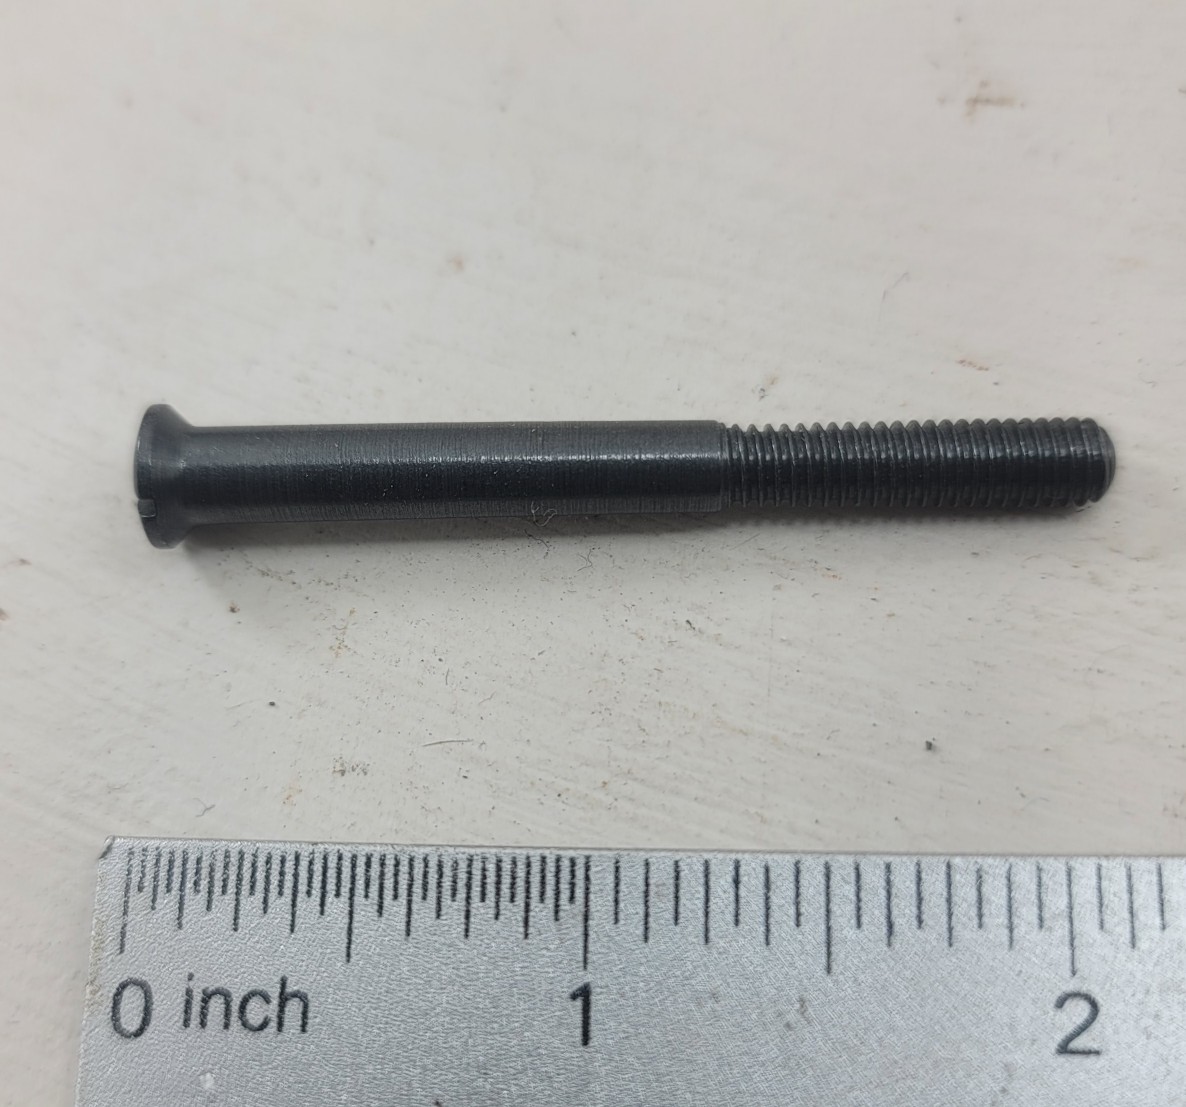 Screw for Rear sight ladder Mounting - Rear screw - Winchester 1895 Carbine and Musket